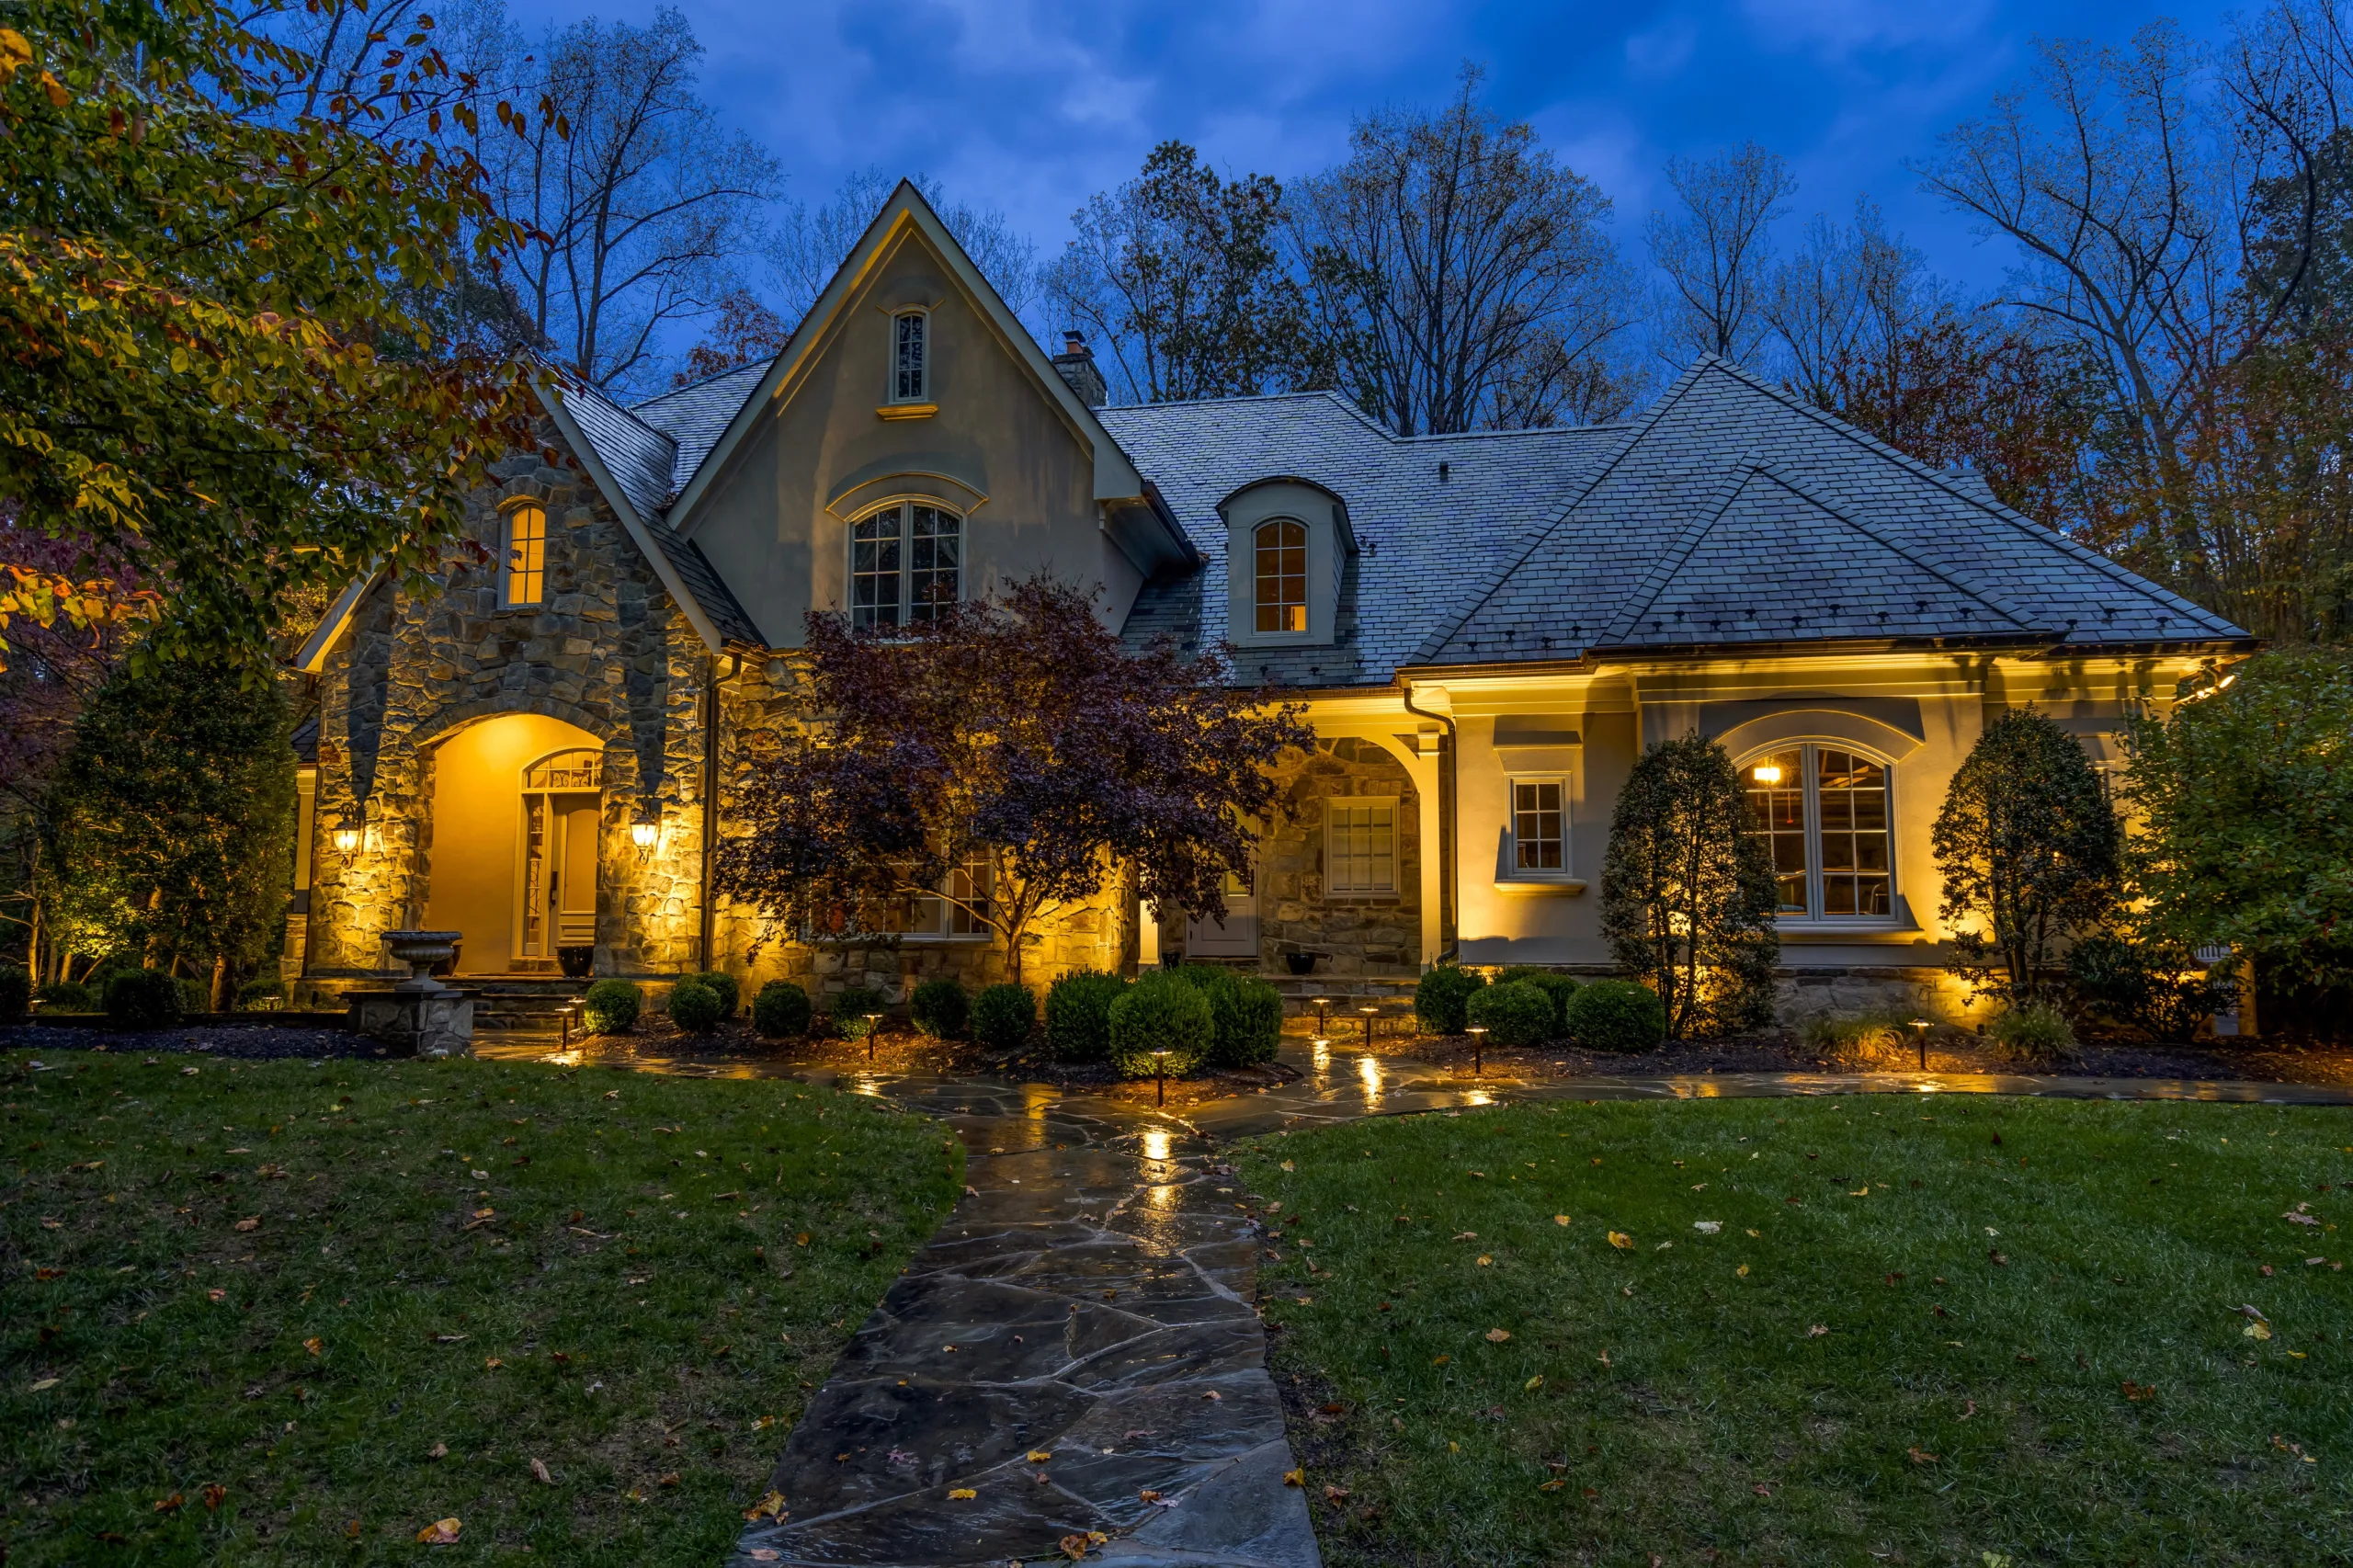 Exterior shot of home at night being illuminated by outdoor landscape lighting